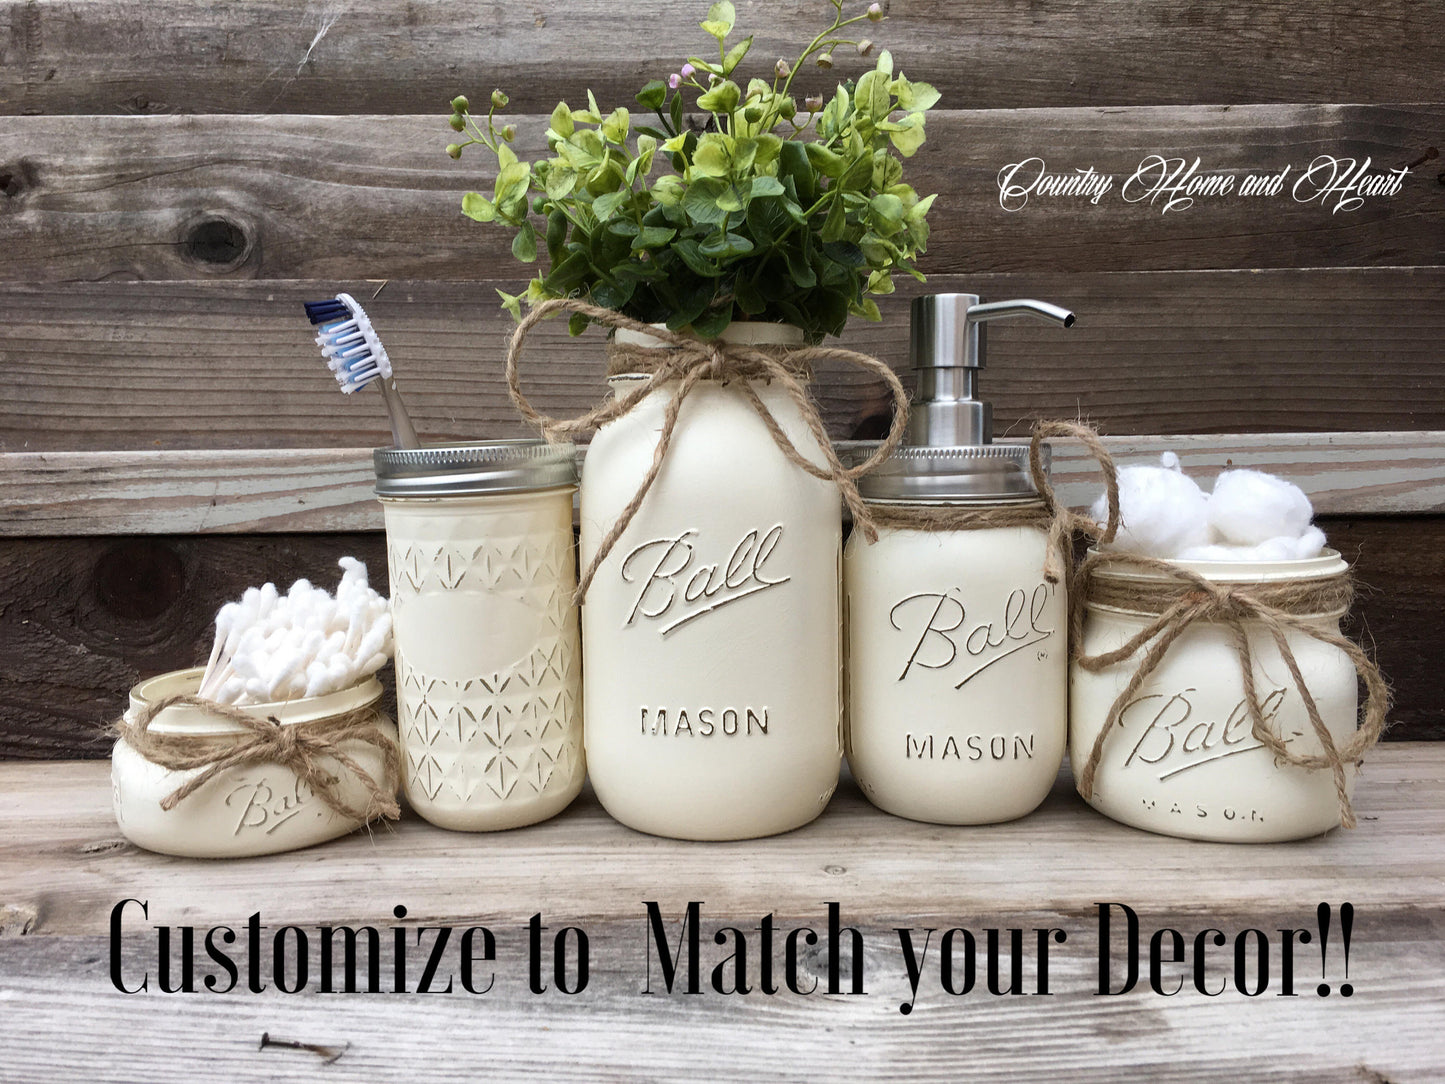 Bathroom Set with Mason Jars with Storage for Qtips, Cotton ball, Toothbrush Holder and Soap Dispenser, Custom Colors and Florals